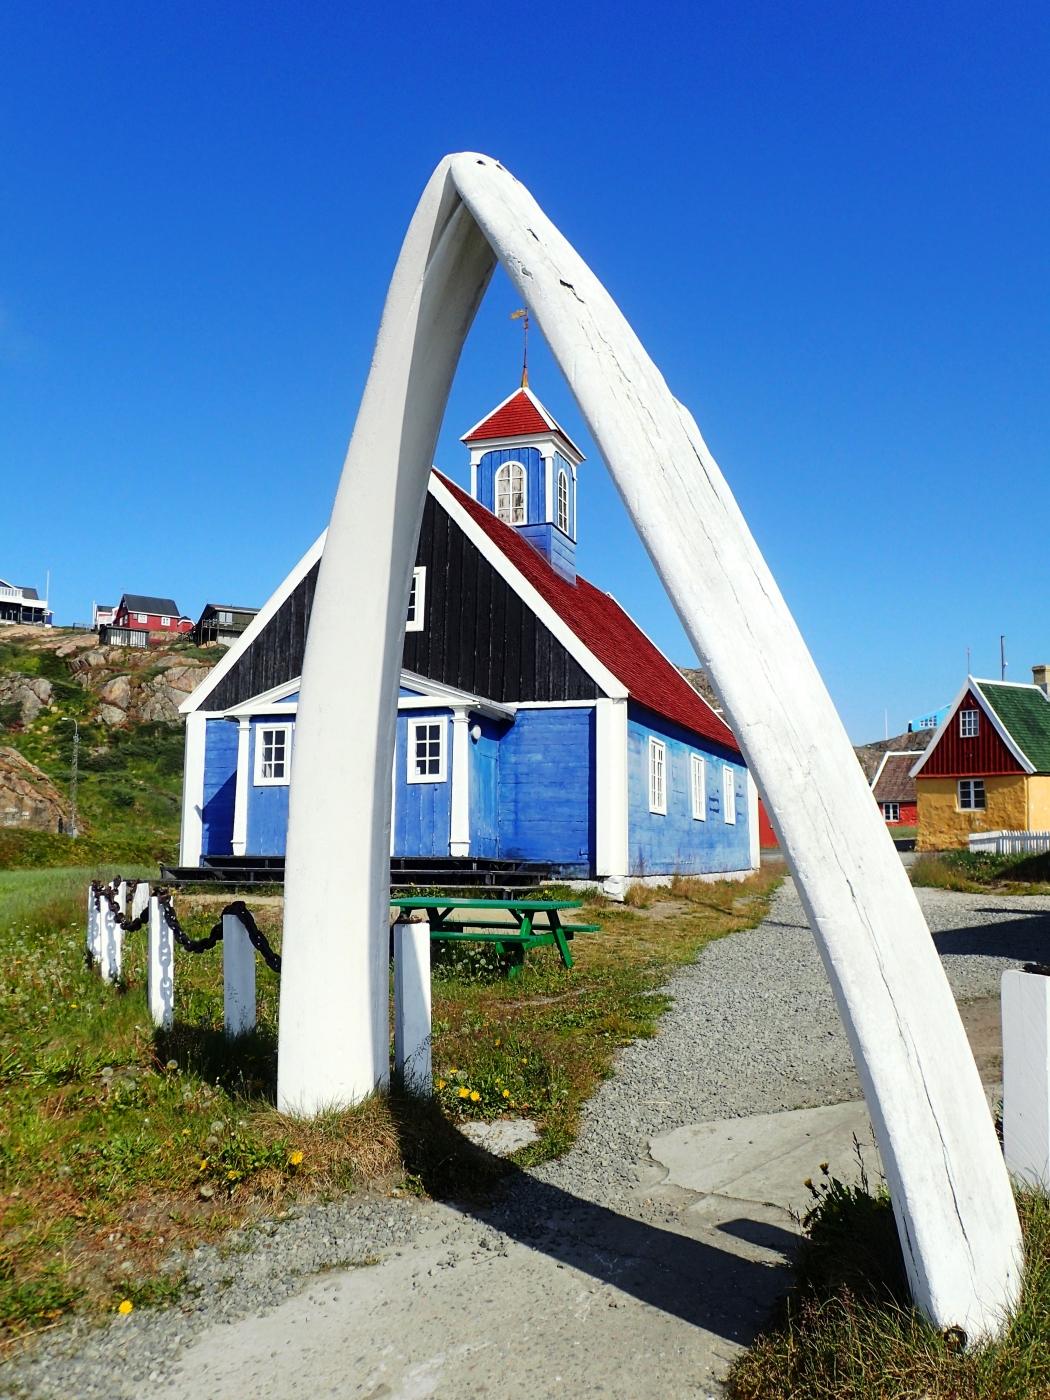 Old Church and Whale Jaw Bones. Photo by Allan Liddle